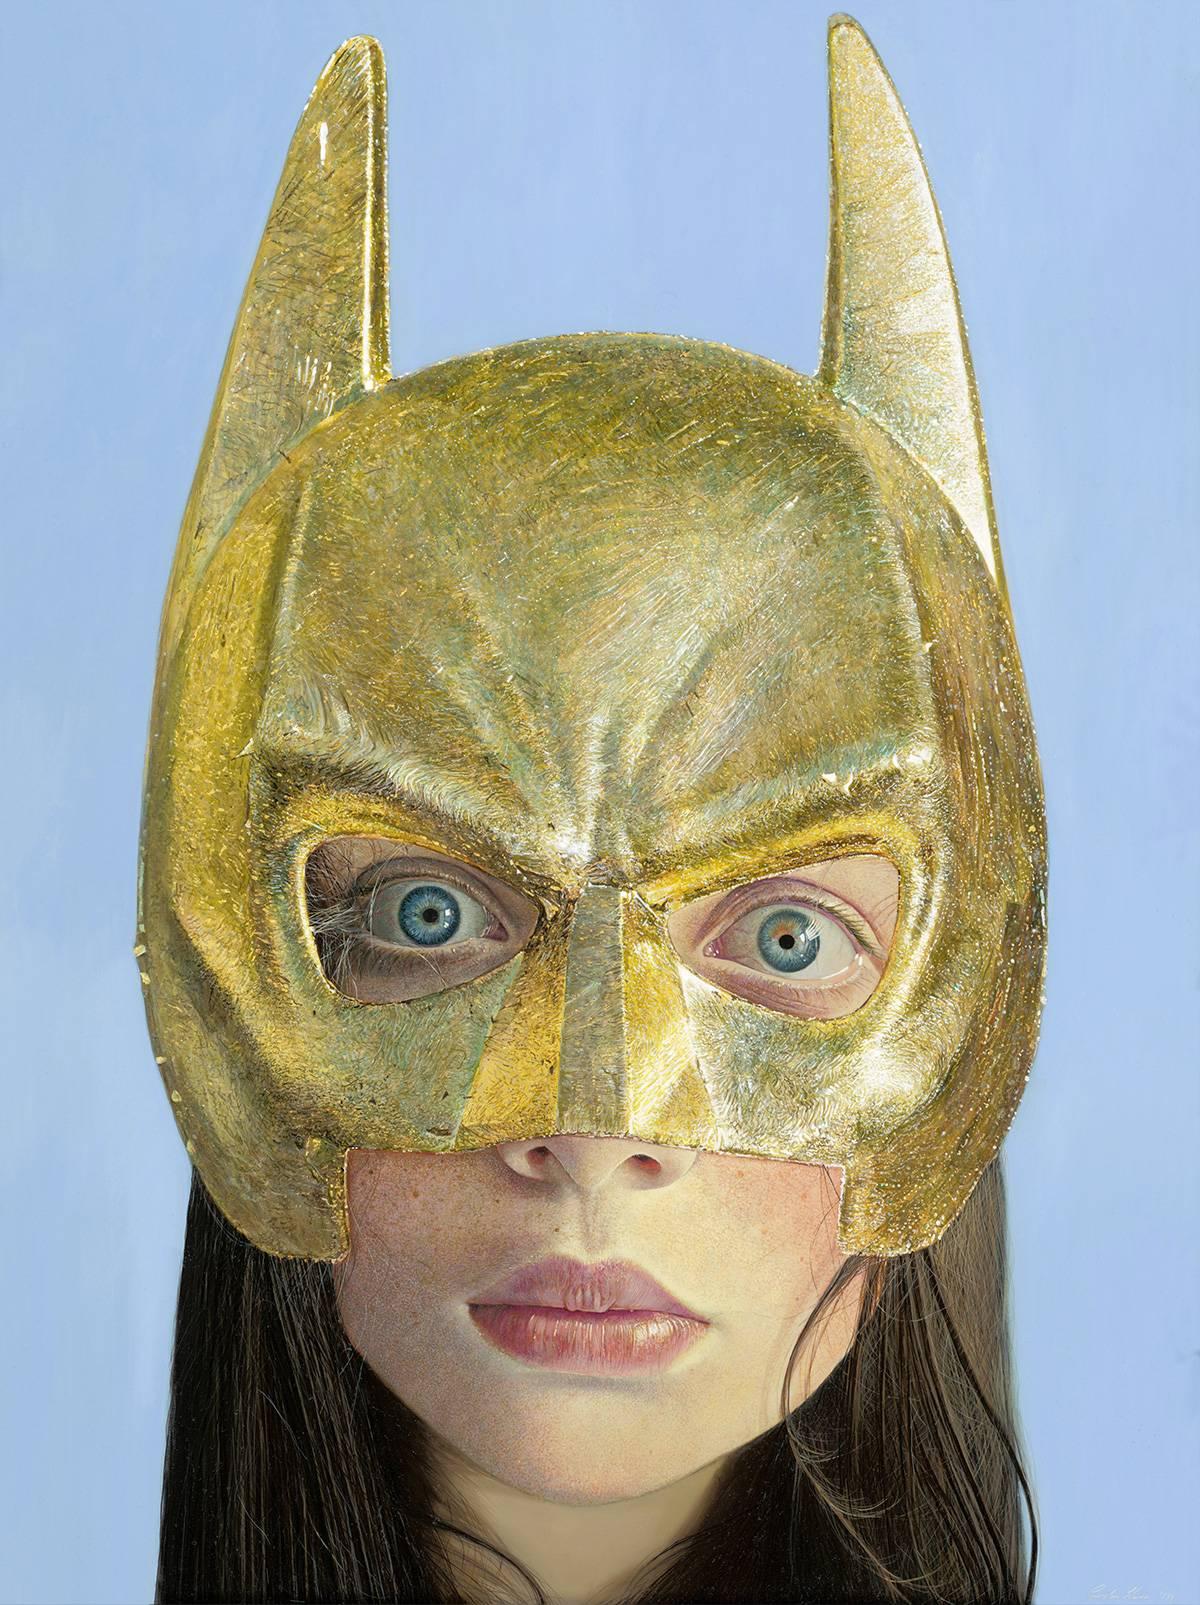 Gordon Harris Figurative Print - Girl With The Golden Mask - Framed Fine Art Limited Edition of 69